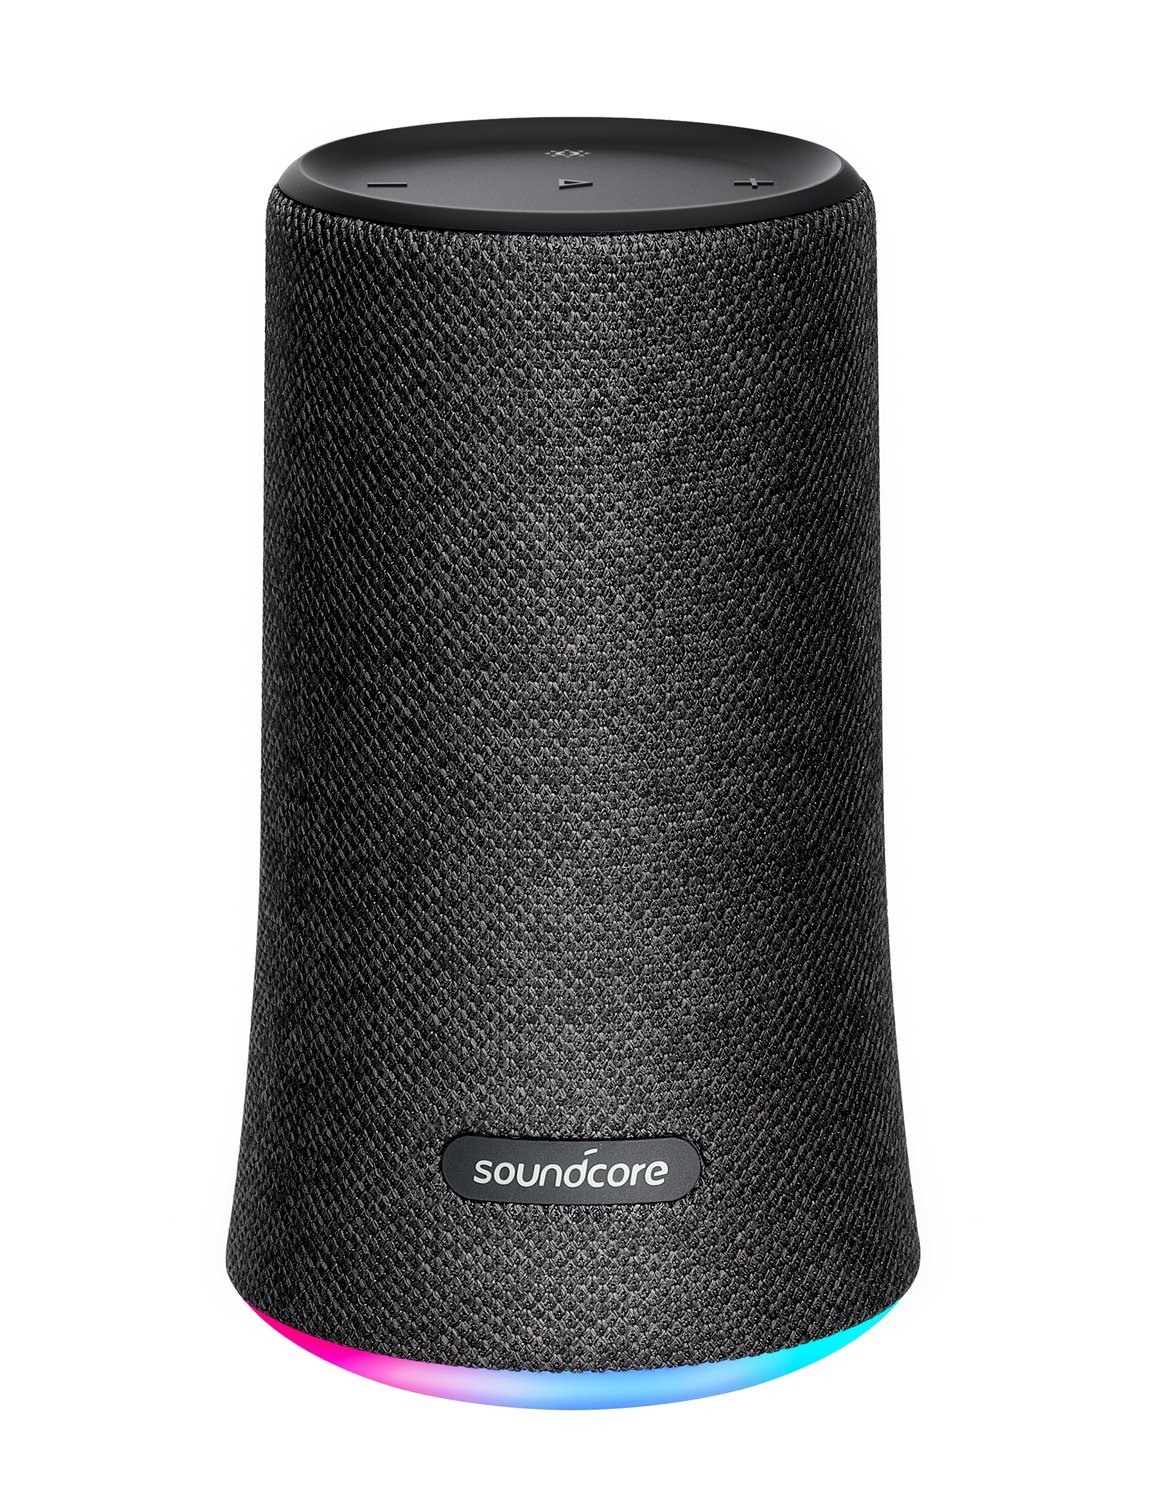 Anker Soundcore Flare Review 2019